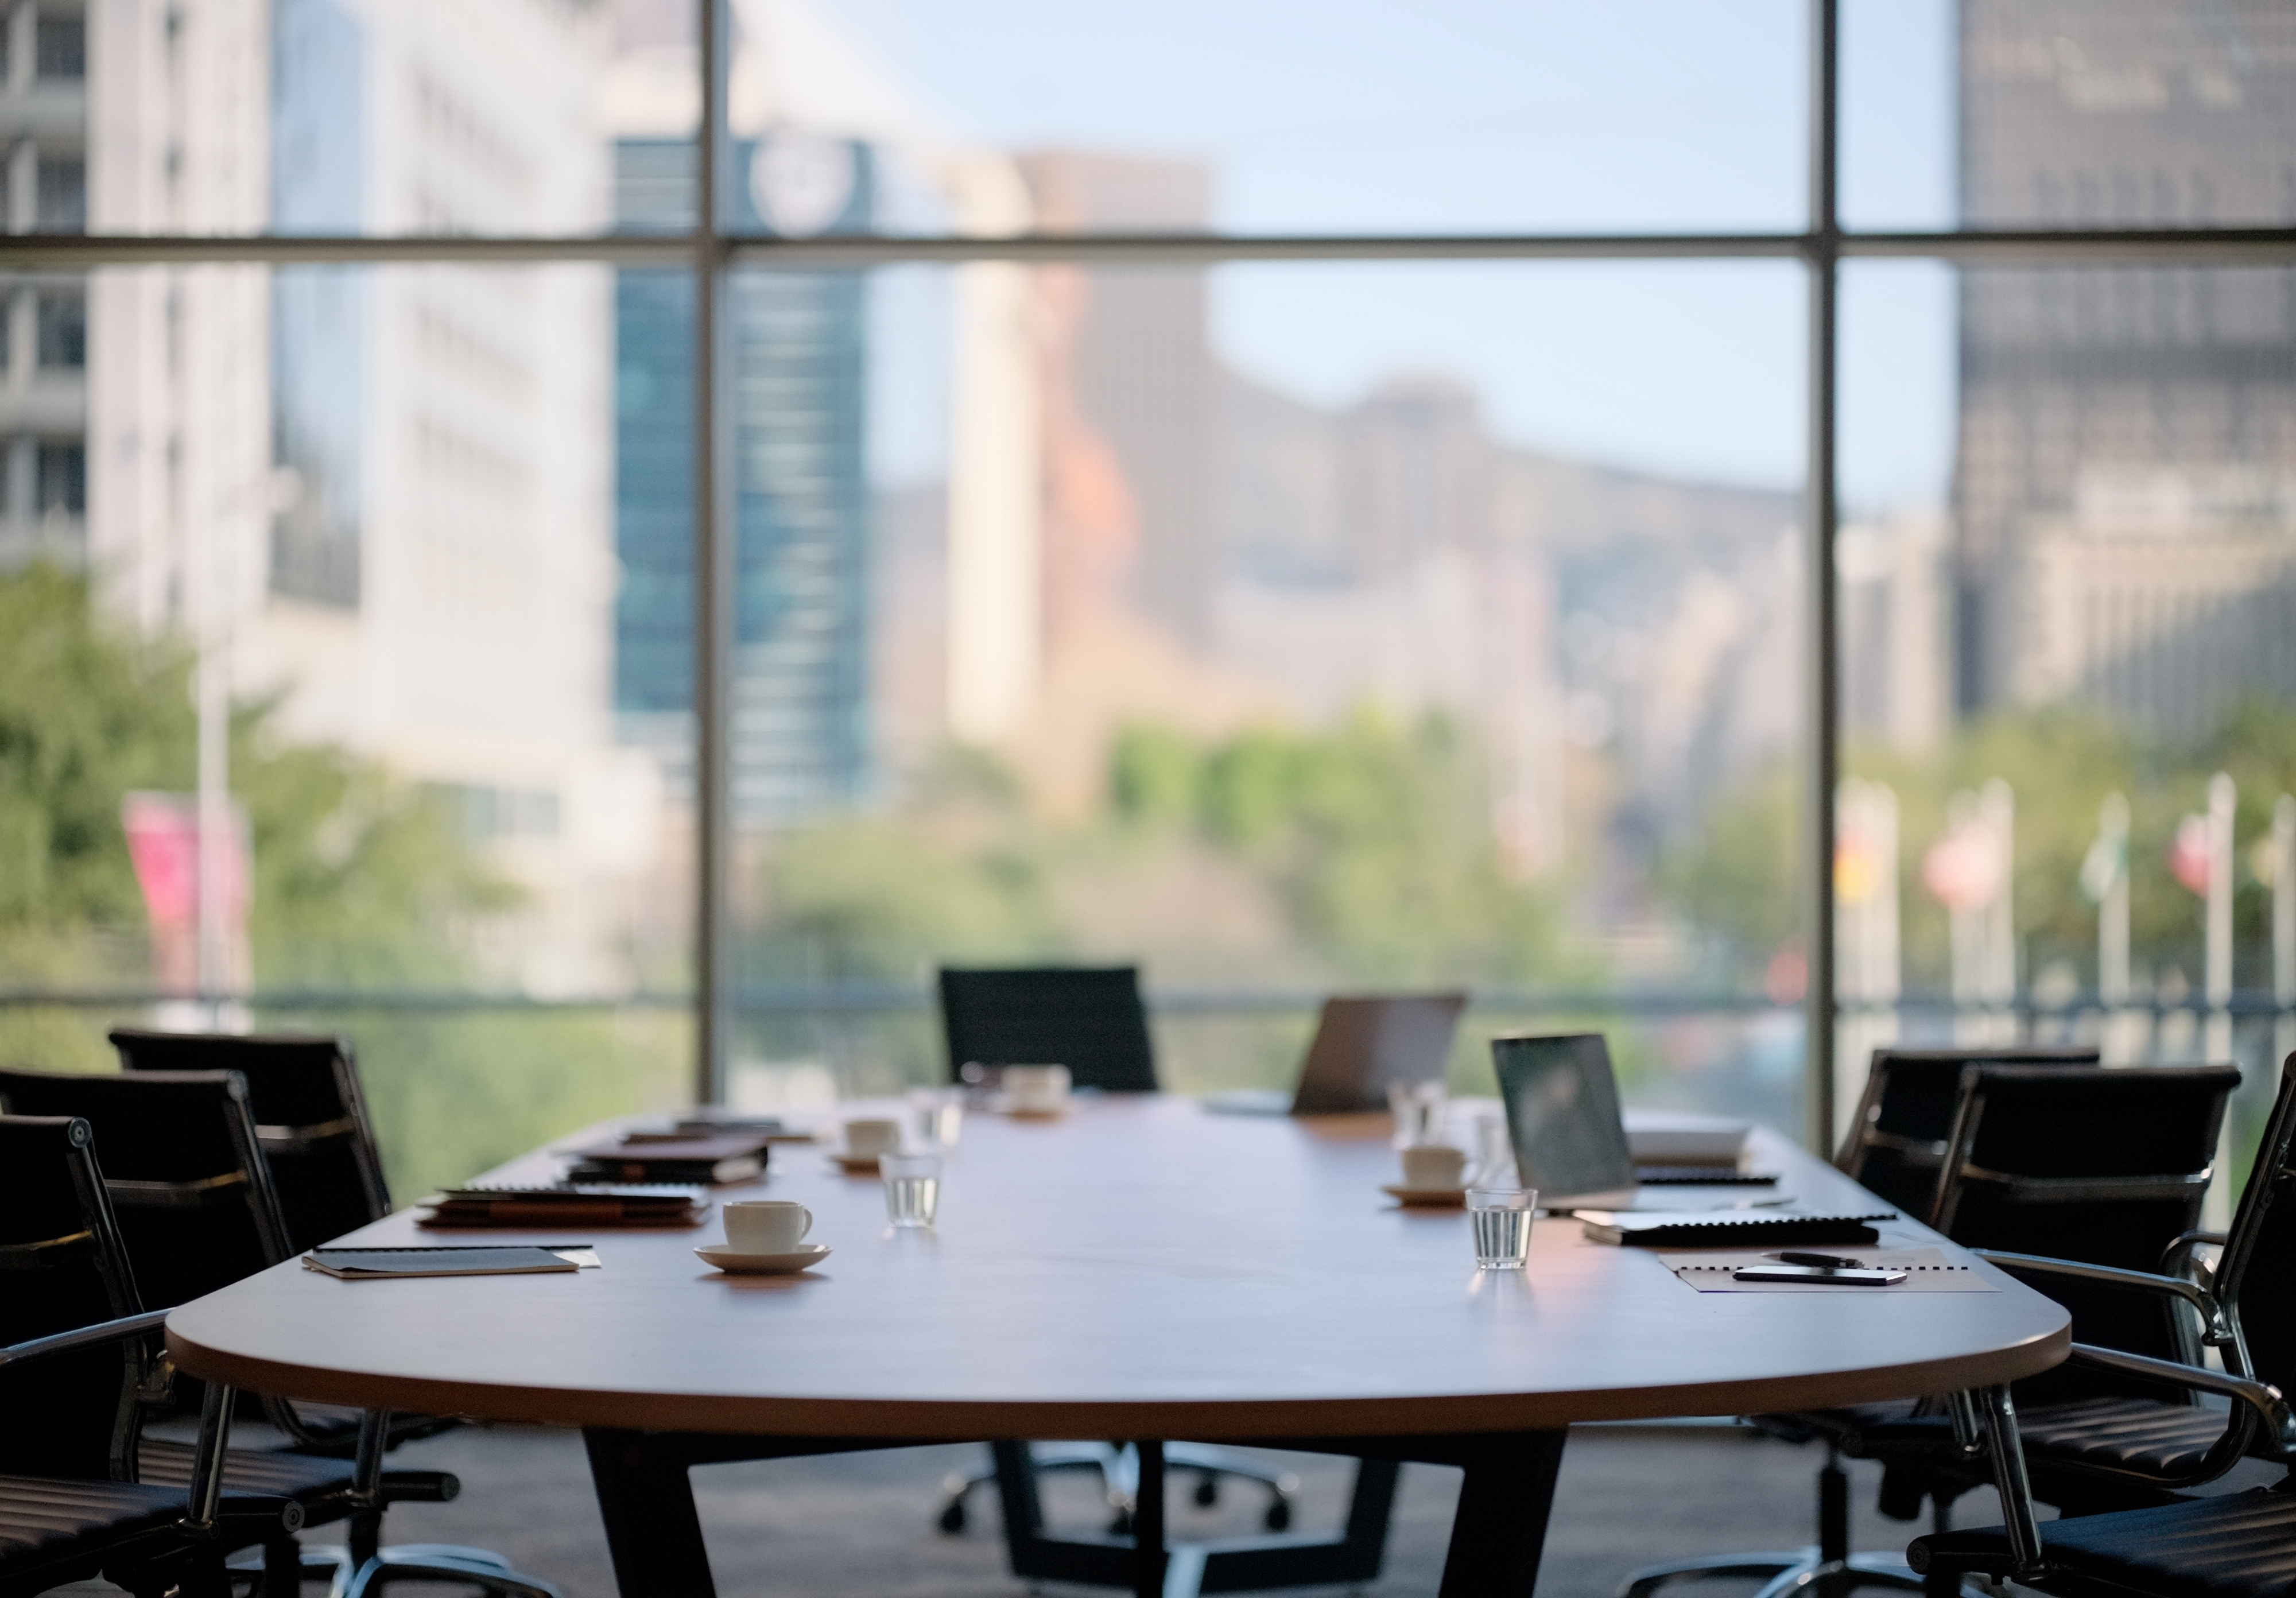 Empty boardroom with large table, chairs, and a cityscape visible through the window